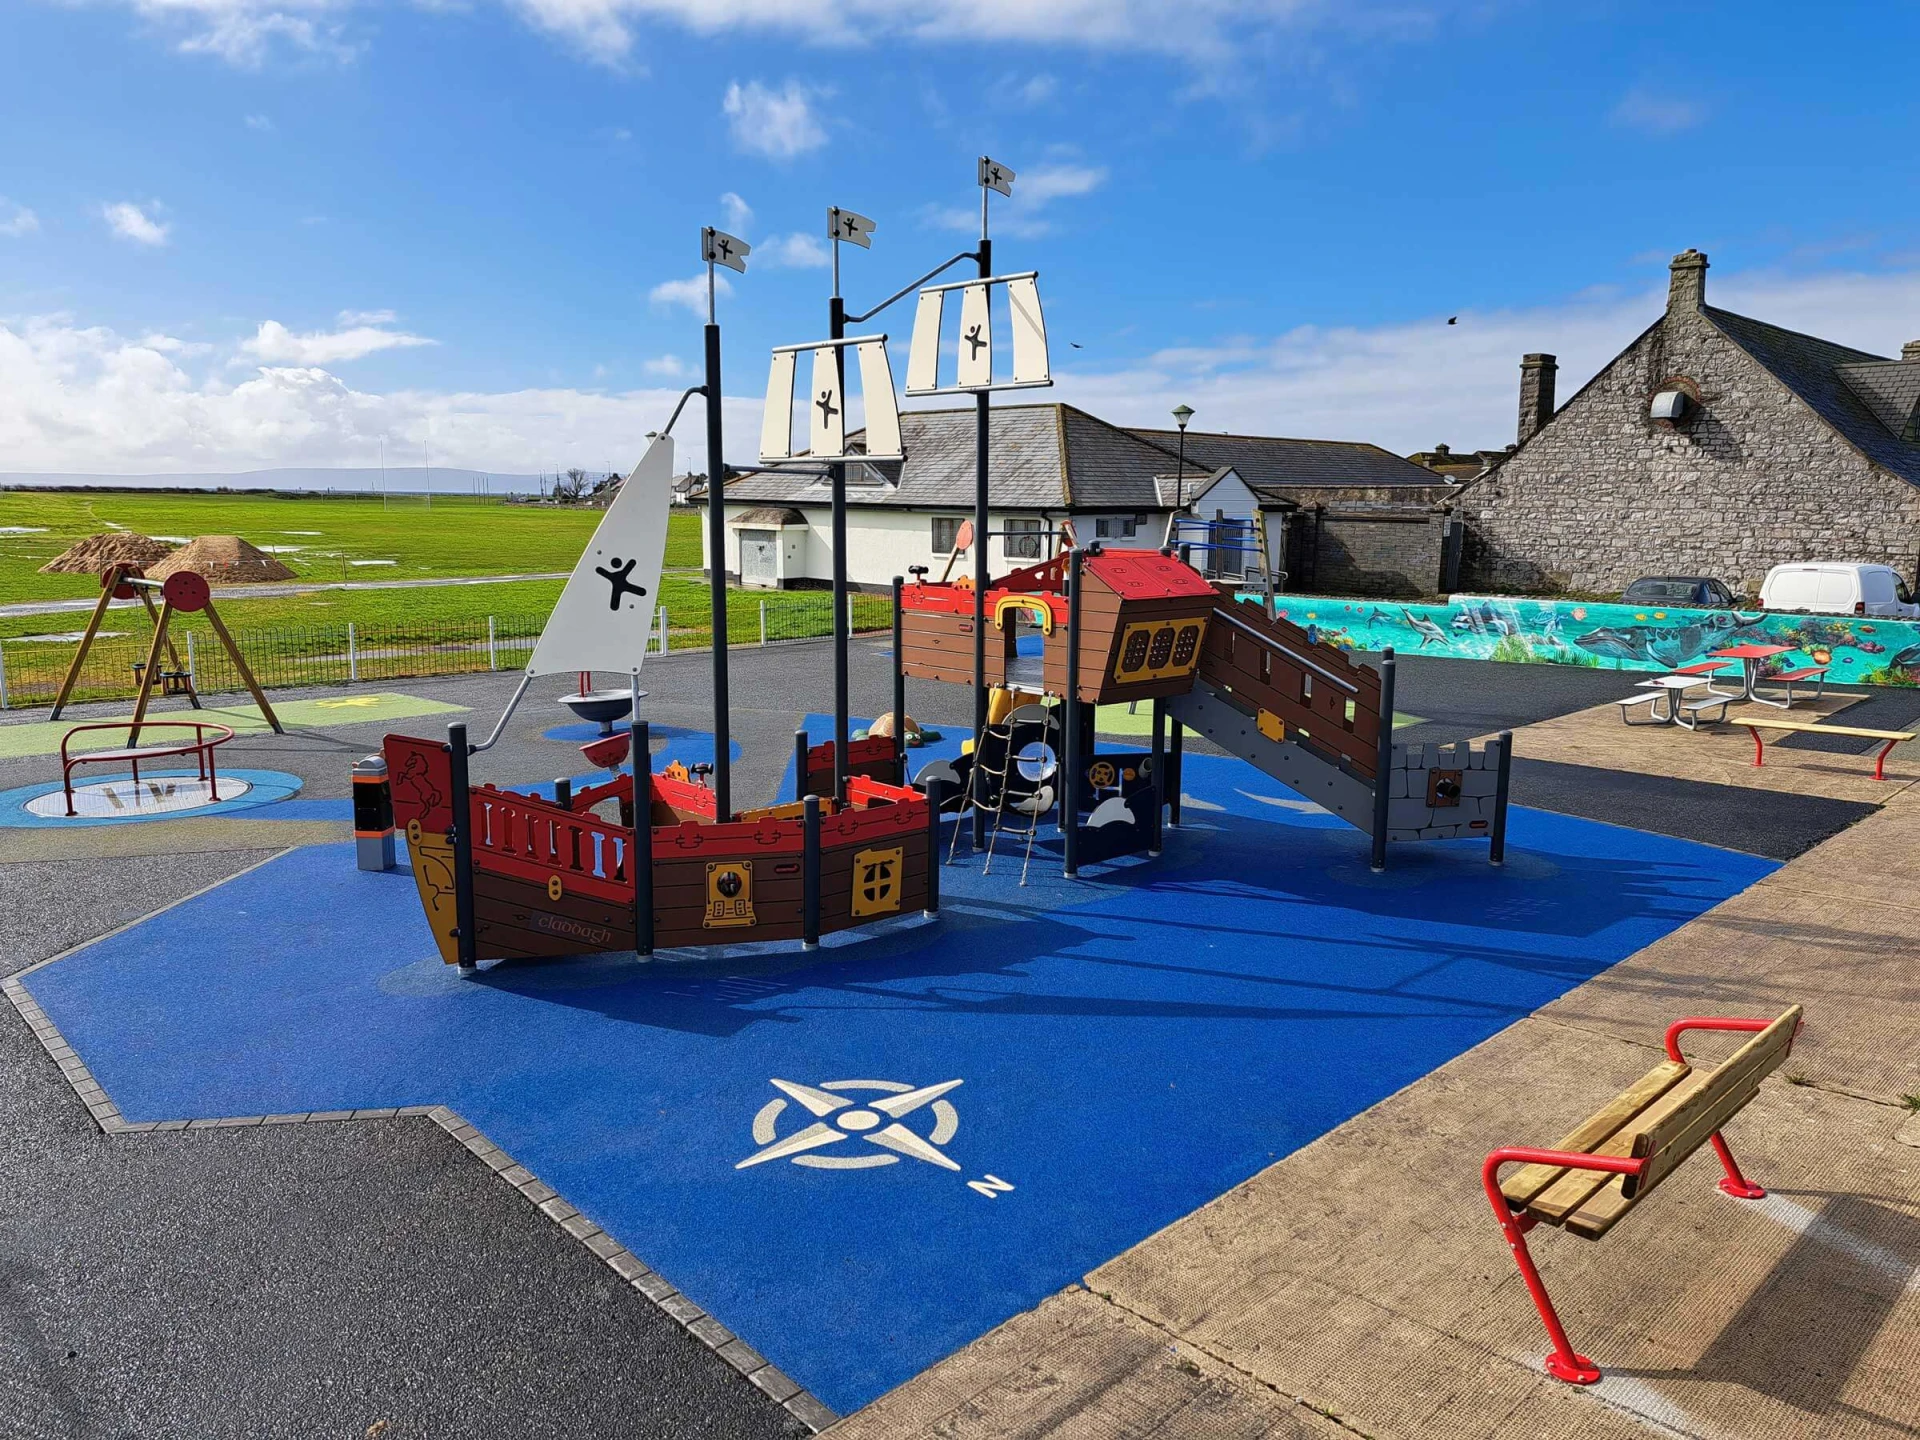 South Park Playground, Claddagh Galway - Image 1 